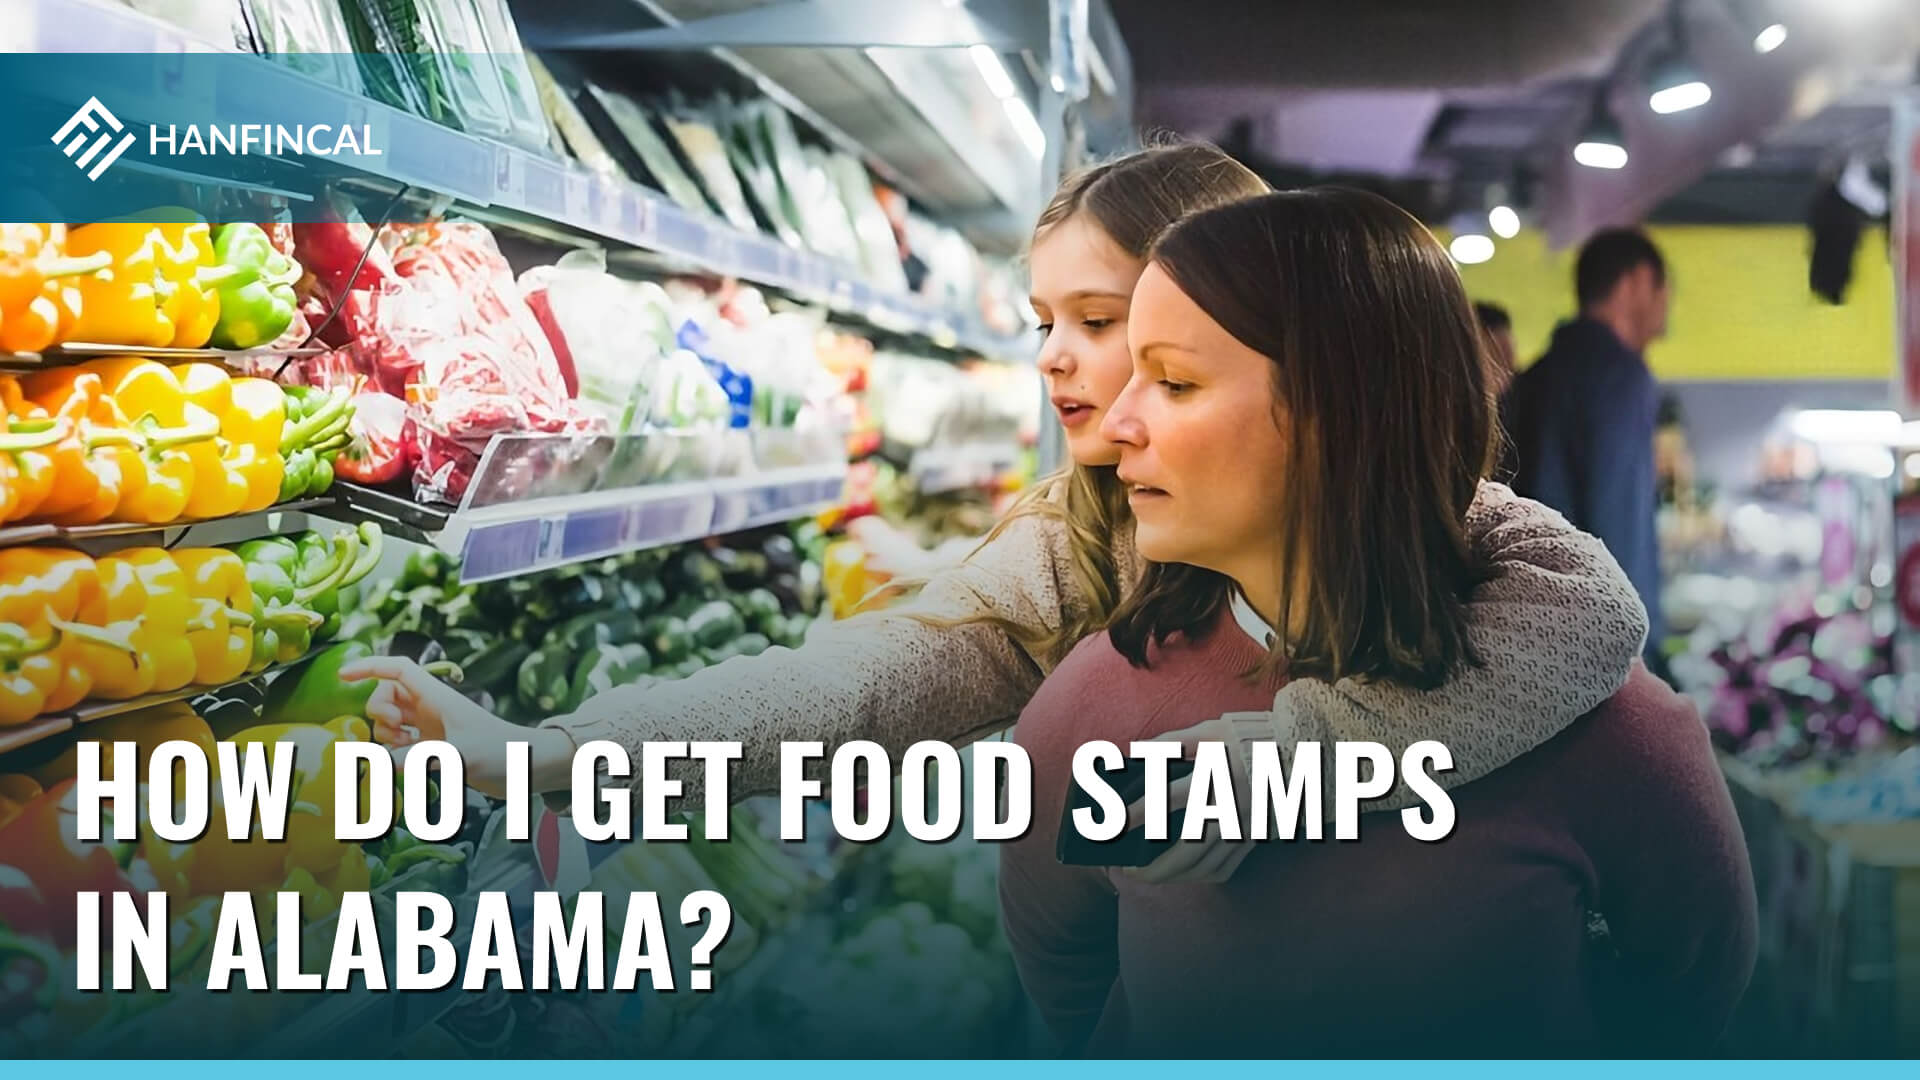 How to apply for Food Stamps in Alabama (AL)?